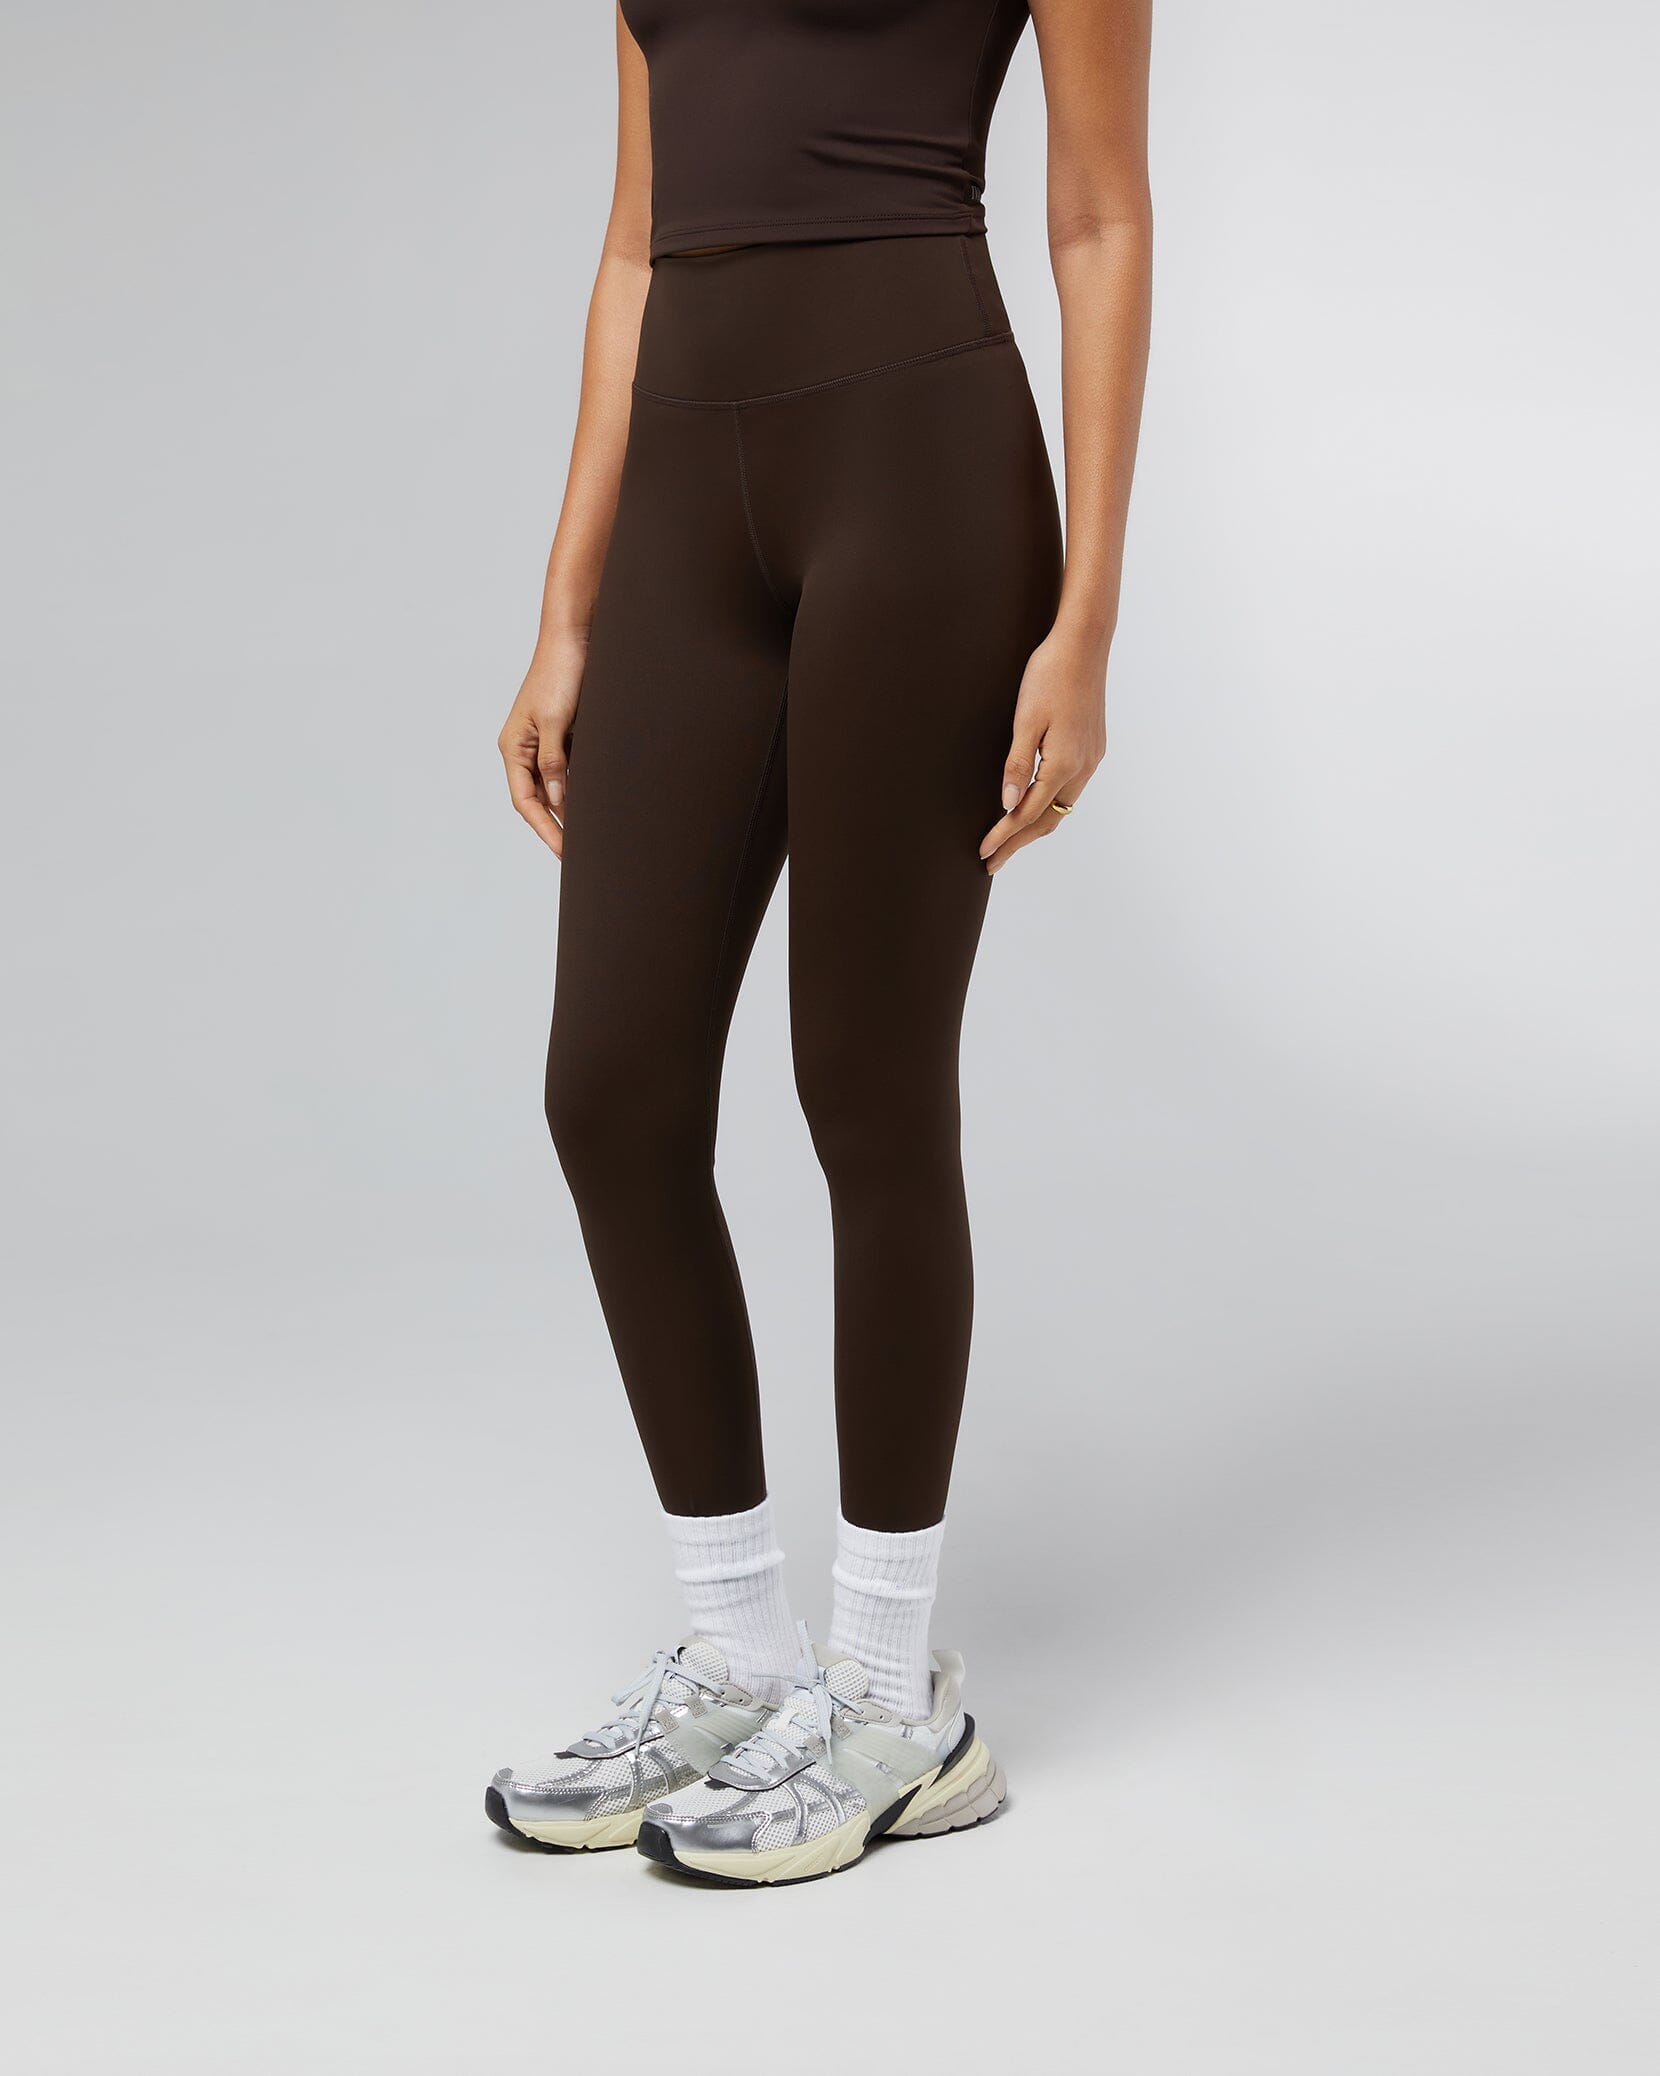 Ivl Collective Colorblock Legging $108 New